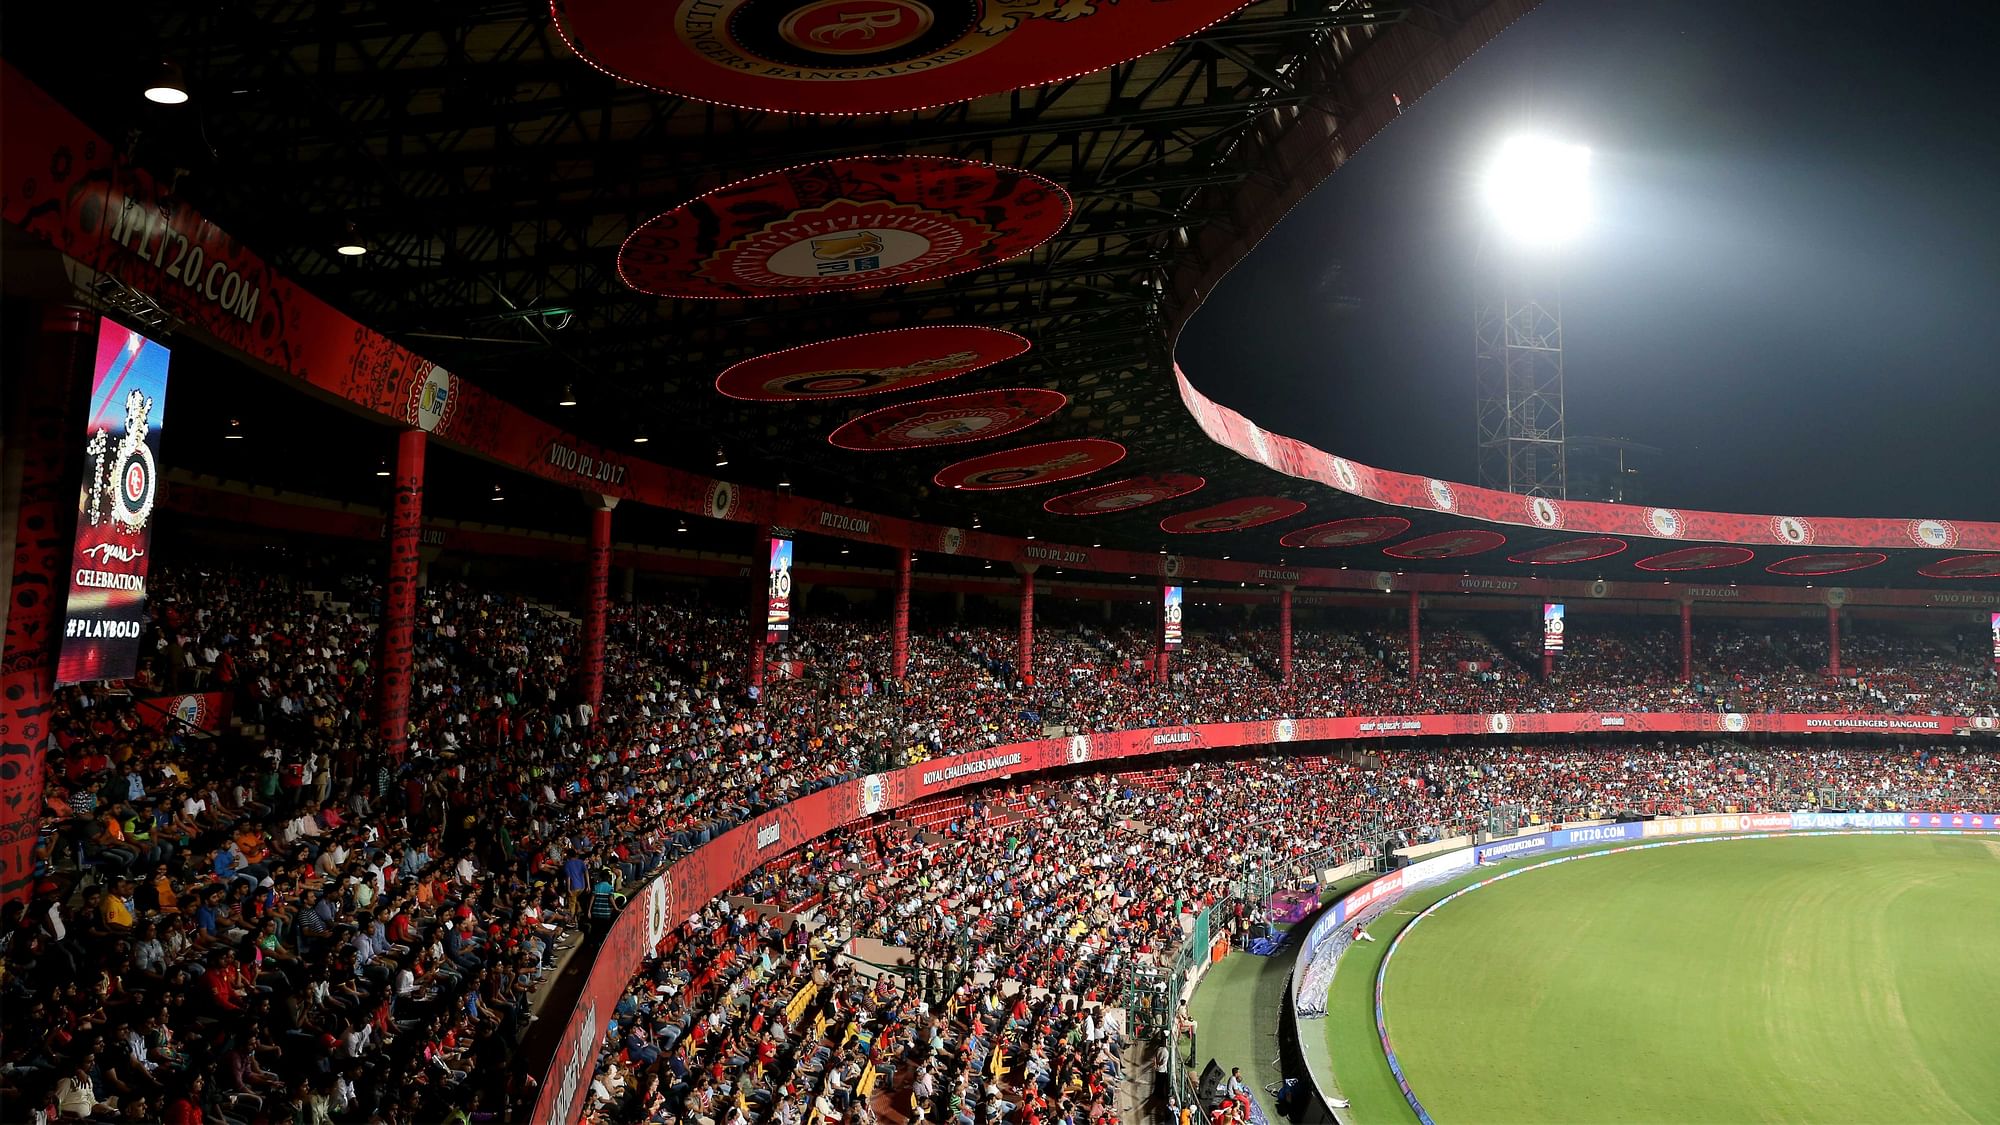 Packed stands have been seen during RCB’s home games at M.Chinnaswamy Stadium this season. (Photo: BCCI)